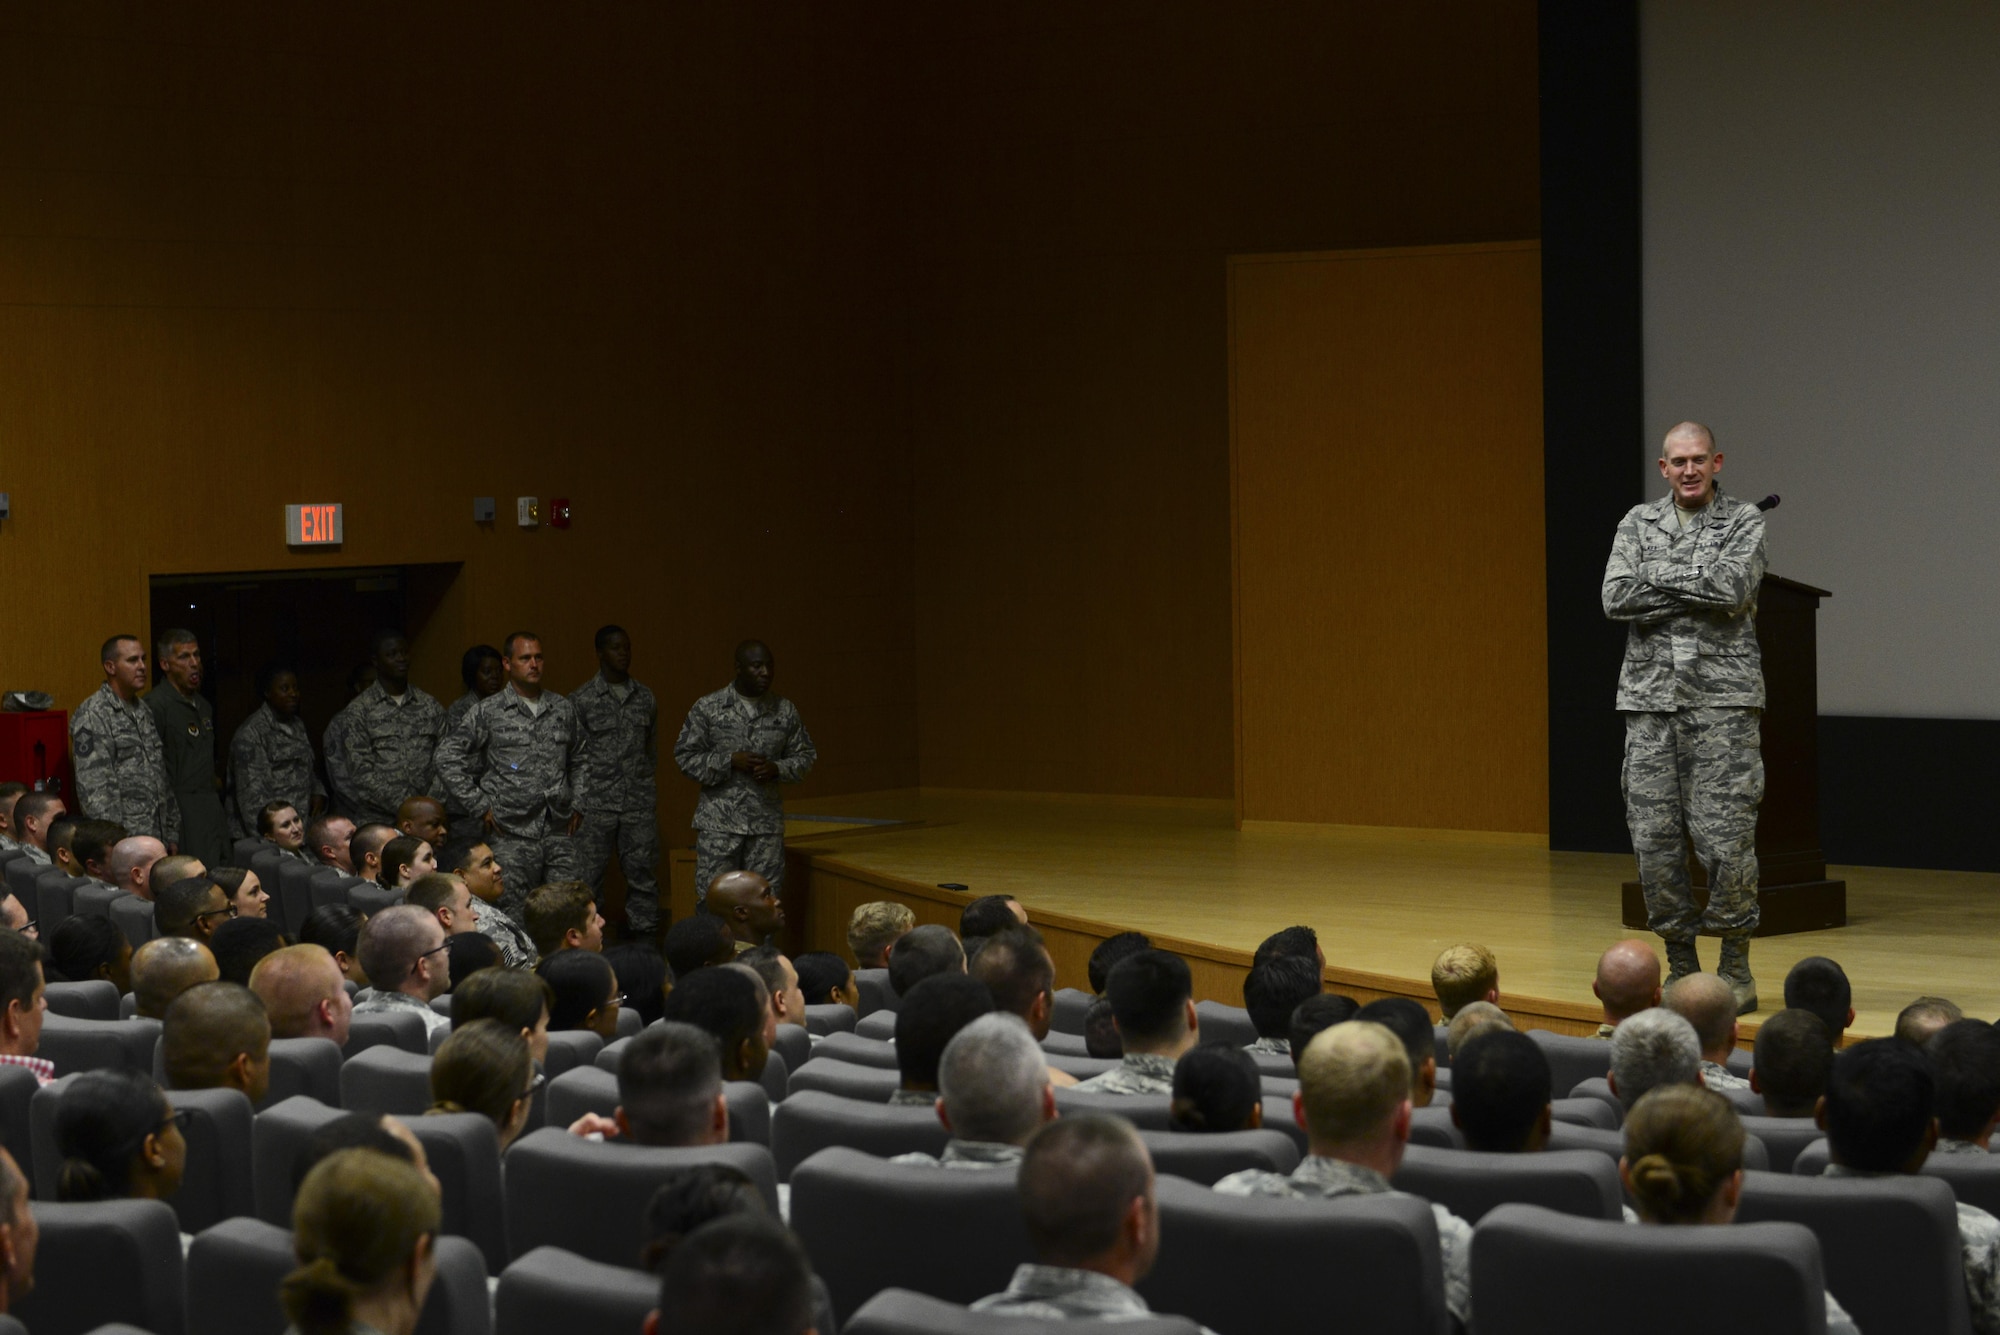 U.S. Air Force Col. John Walker, 39th Air Base Wing commander, addresses wing personnel about recent conditions July 24, 2016, at Incirlik Air Base, Turkey. Walker expressed his gratitude for the hard work and dedication of the men and women serving at Incirlik. (U.S. Air Force photo by Tech. Sgt. Caleb Pierce) 